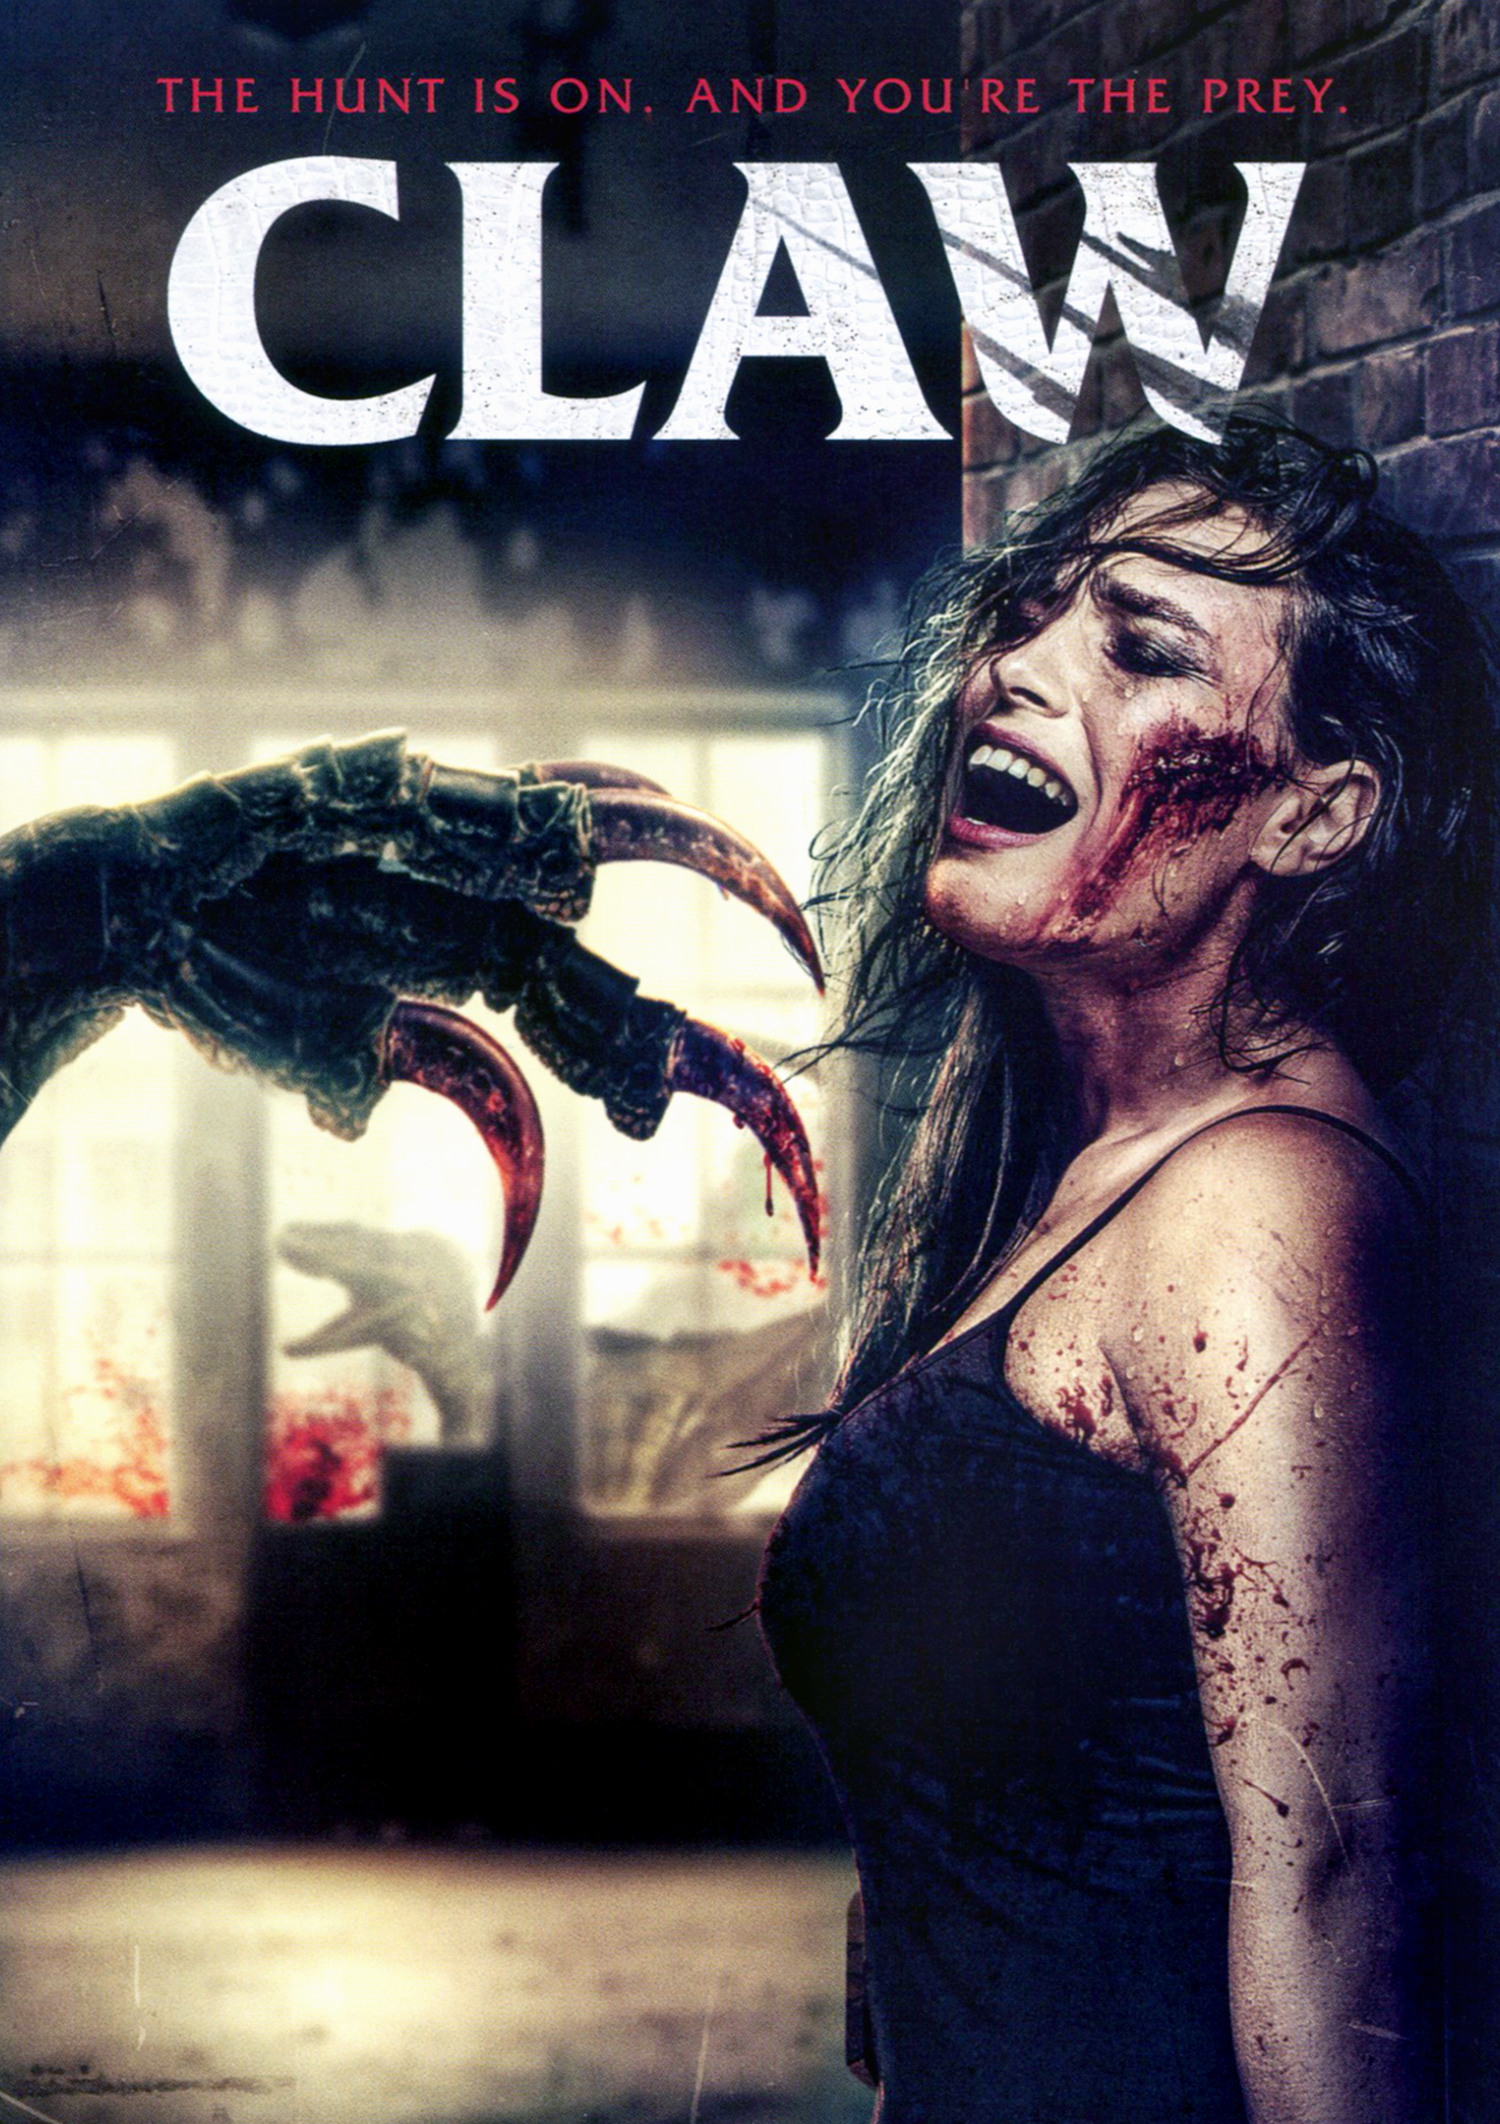 Claw (2021) Dual Audio Hindi (ORG) 1080p 720p 480p WEB-DL ESubs Free Download